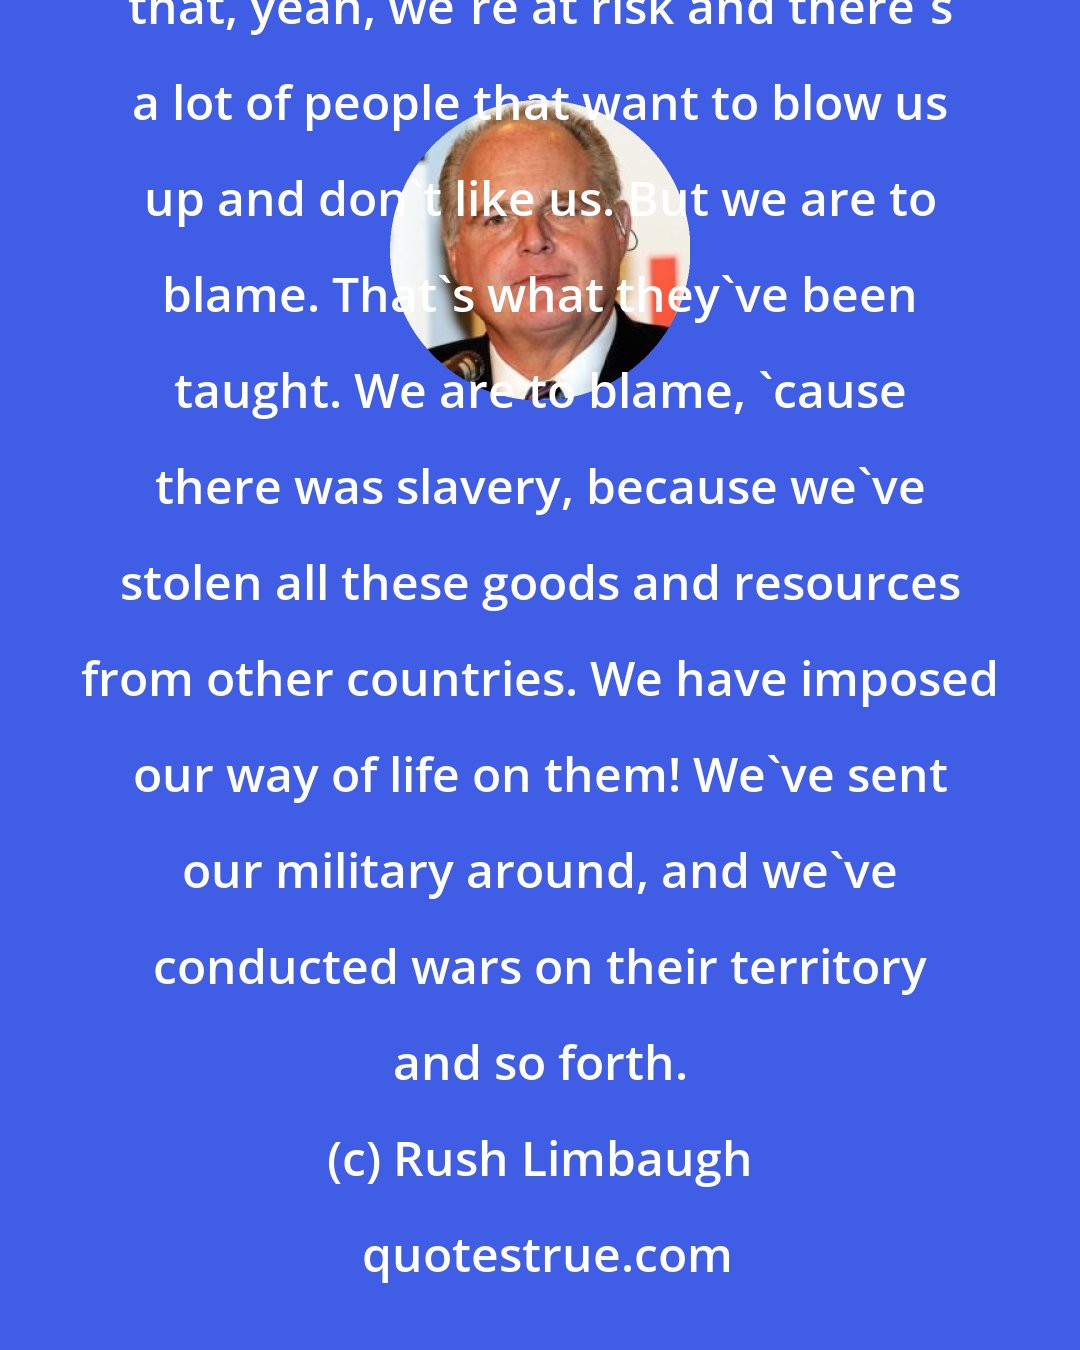 Rush Limbaugh: Do you realize how many people of this country have been educated, have grown up, who have been taught that, yeah, we're at risk and there's a lot of people that want to blow us up and don't like us. But we are to blame. That's what they've been taught. We are to blame, 'cause there was slavery, because we've stolen all these goods and resources from other countries. We have imposed our way of life on them! We've sent our military around, and we've conducted wars on their territory and so forth.